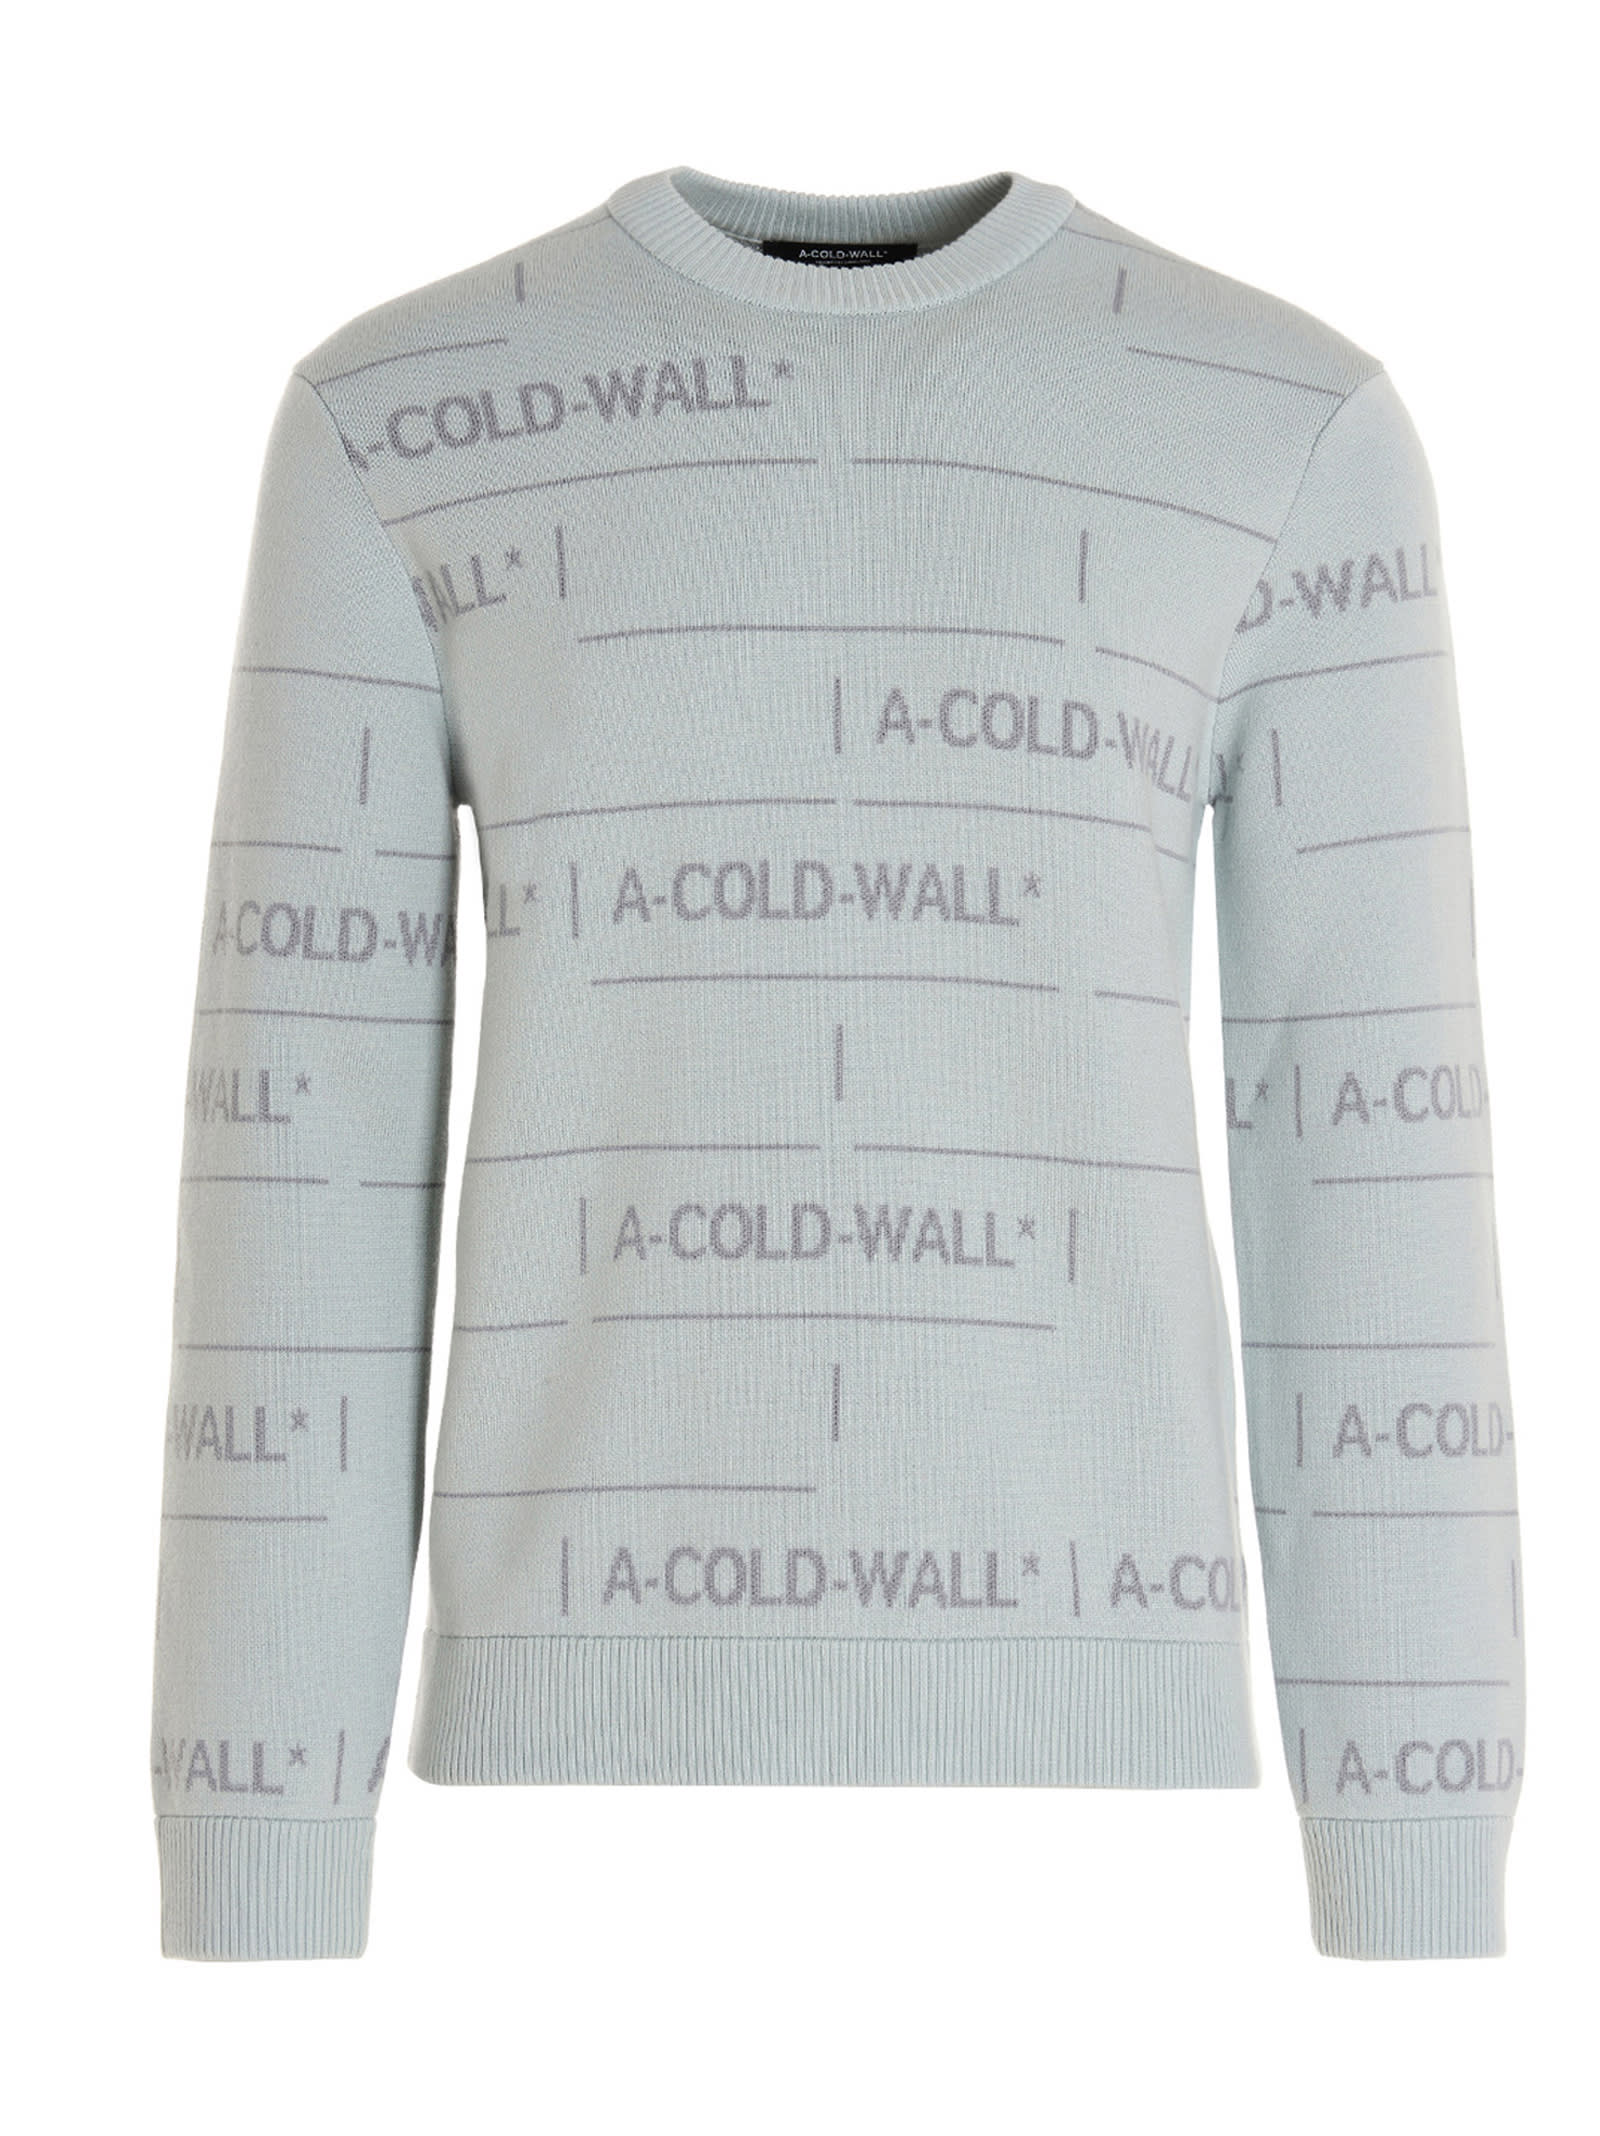 A-cold-wall chain Jacquard Sweater